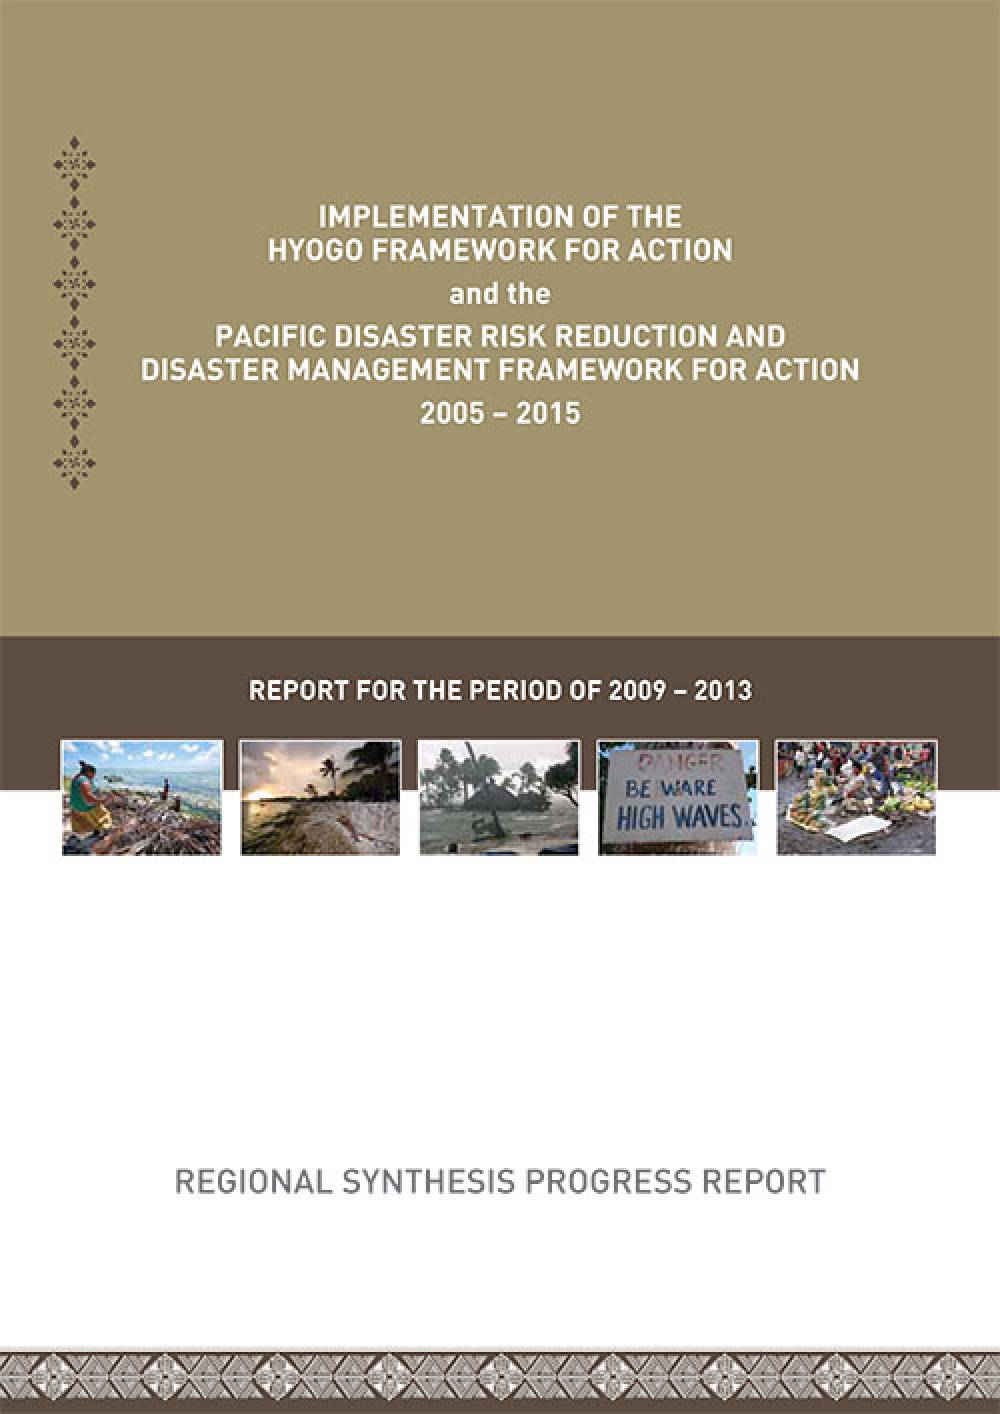 Implementation of the Hyogo Framework for Action & The Pacific Disaster Risk Reduction & Disaster Management Framework For Action